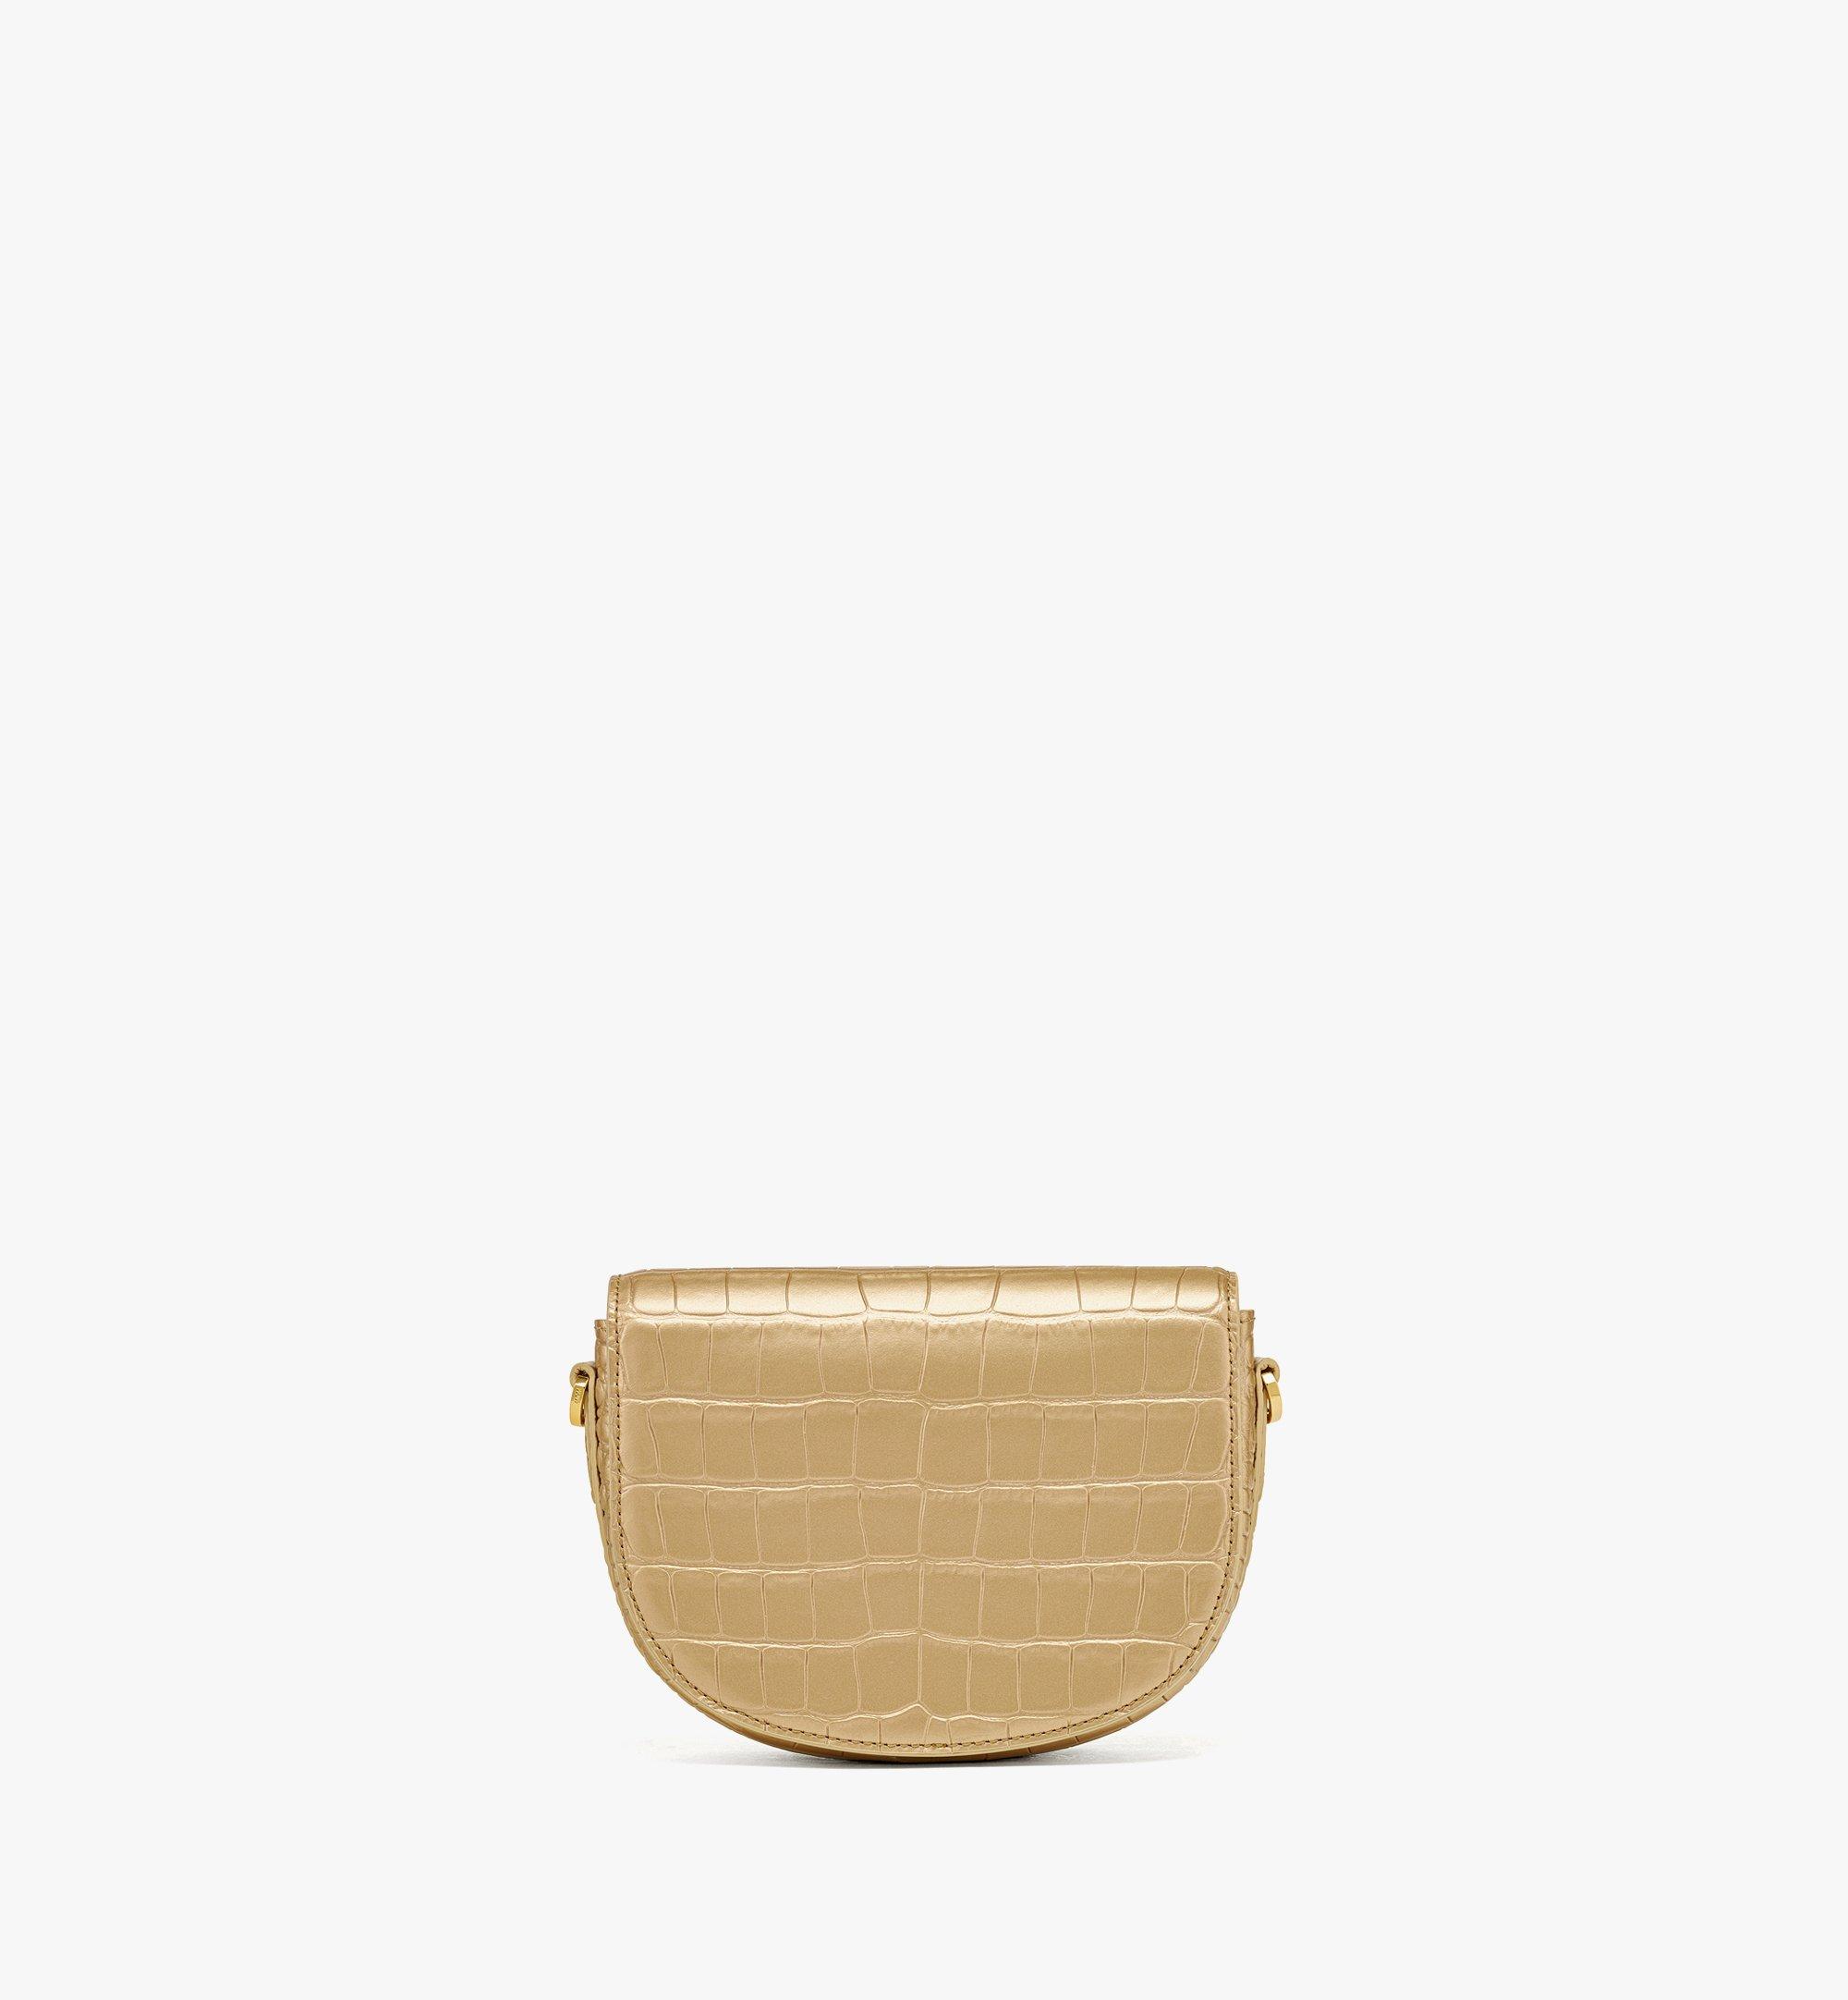 MCM Mode Travia Crossbody in Gold Croco-Embossed Leather Gold MWRDSLD01DG001 Alternate View 3